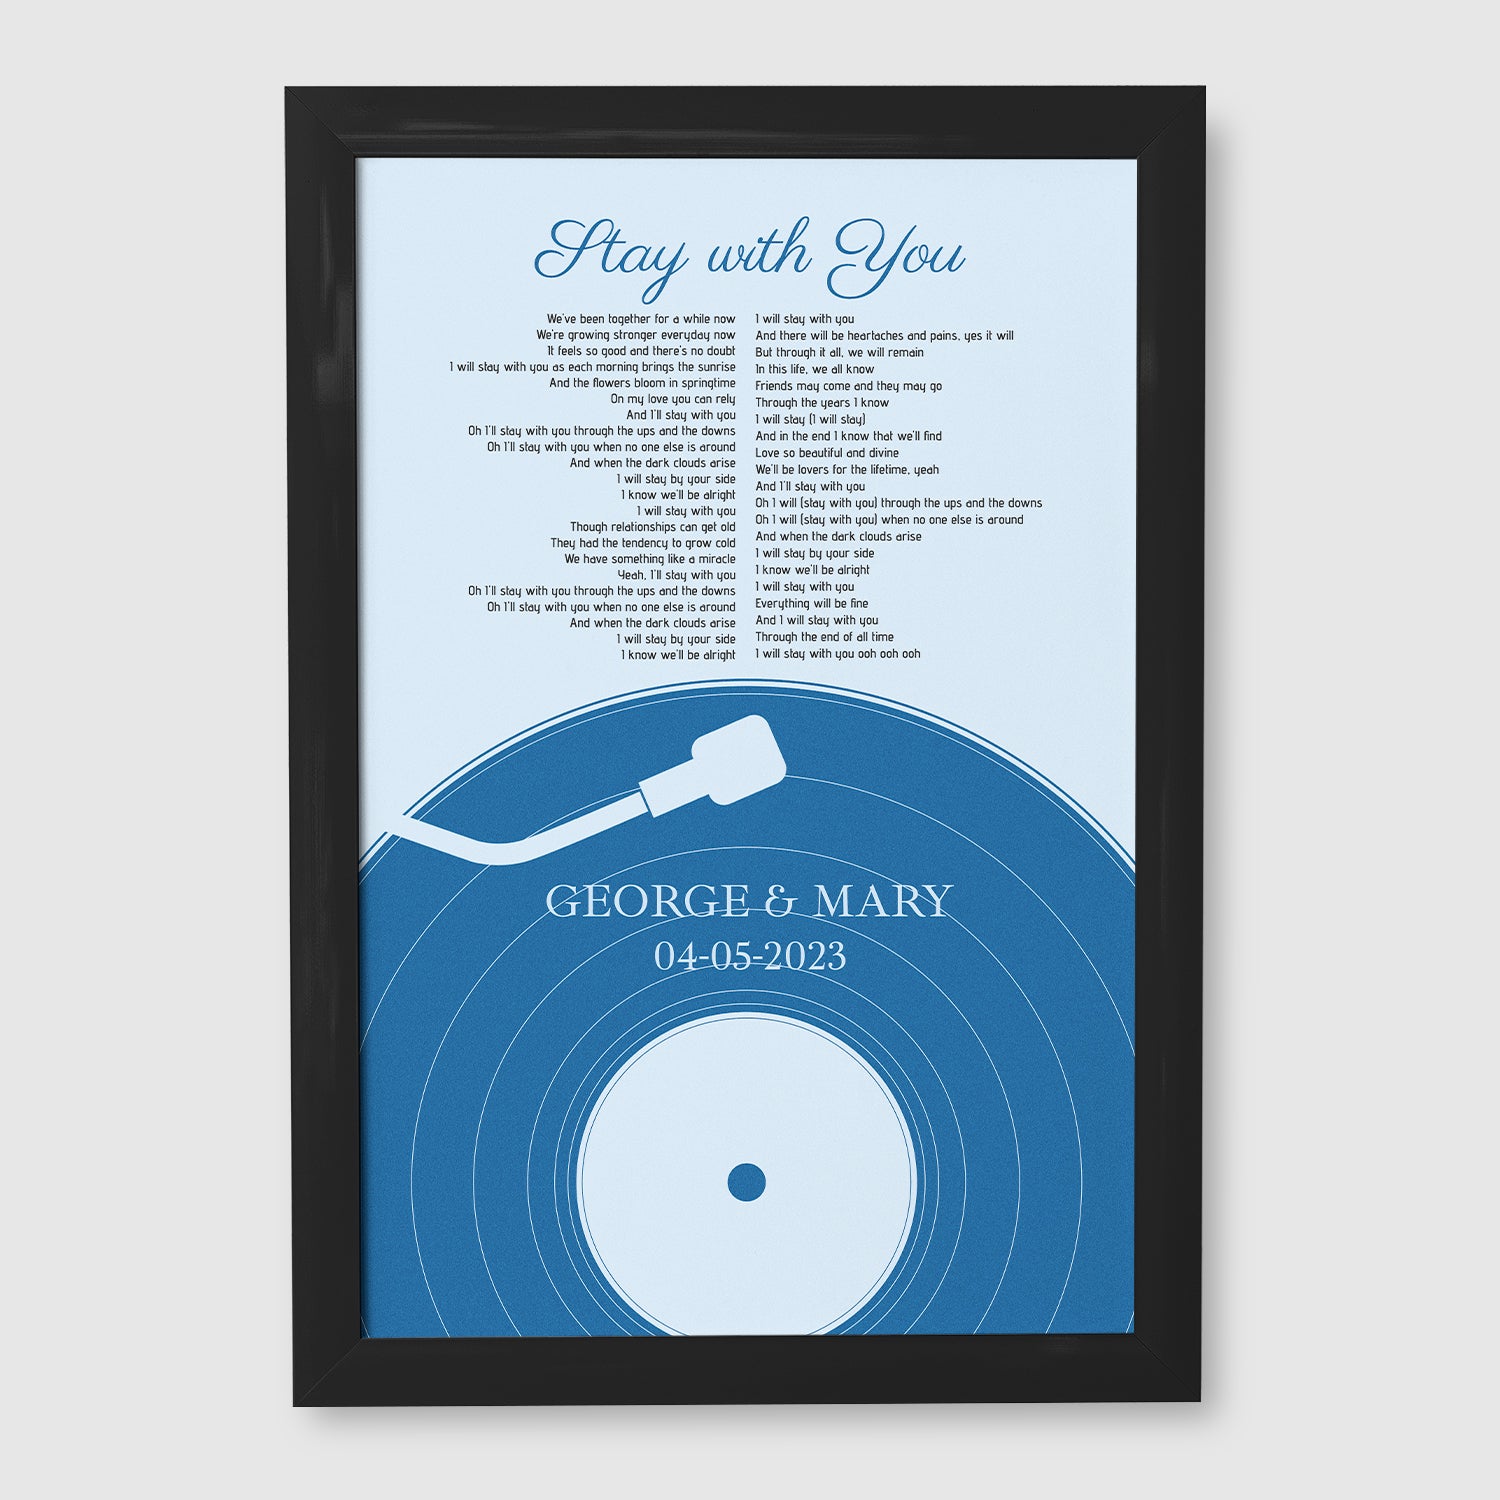 Personalized Frame With Song Lyrics, Pastel Blue Vinyl Record Framed Art Print